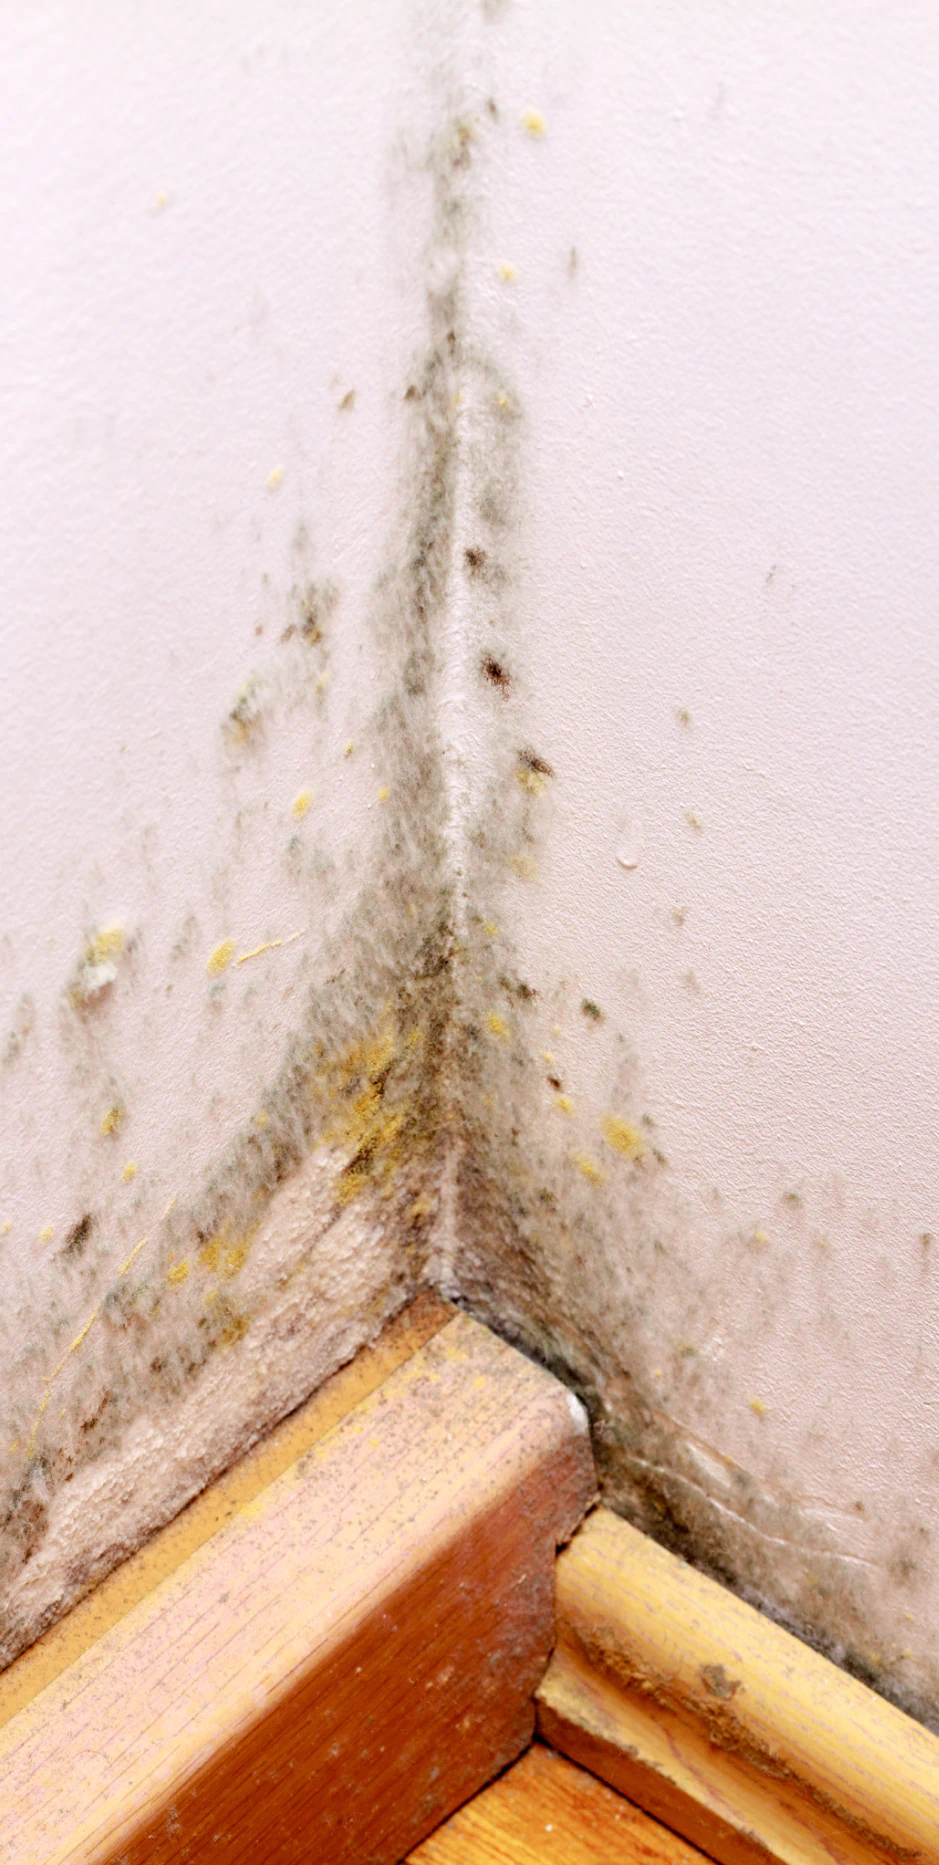 a mold infested corner